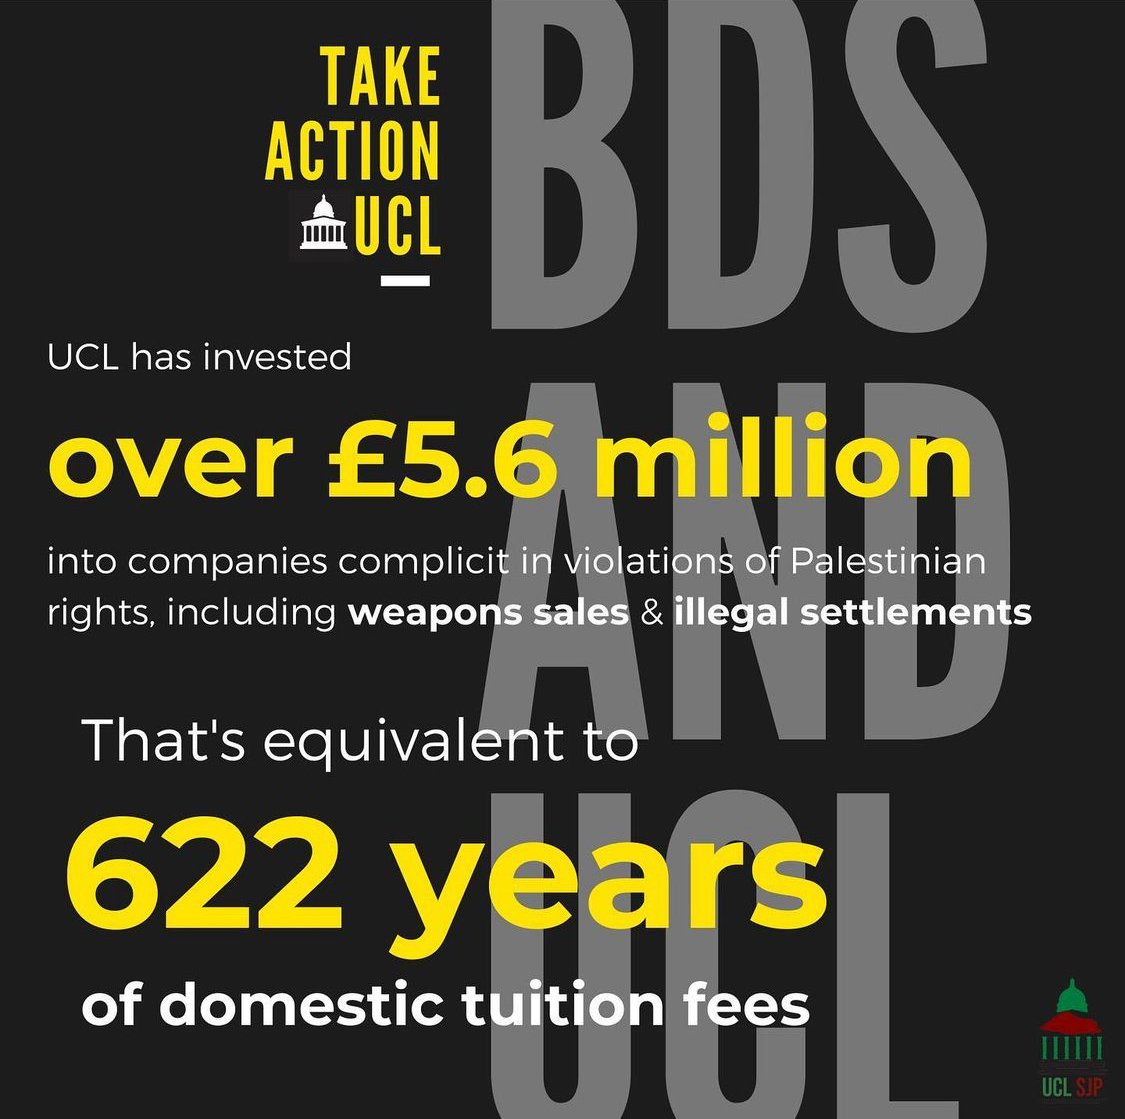 UCL has invested over £5.6 million into companies complicit in violations of Palestinian rights, including weapons sales and illegal settlements. That’s equivalent to 622 years of domestic tuition fees.